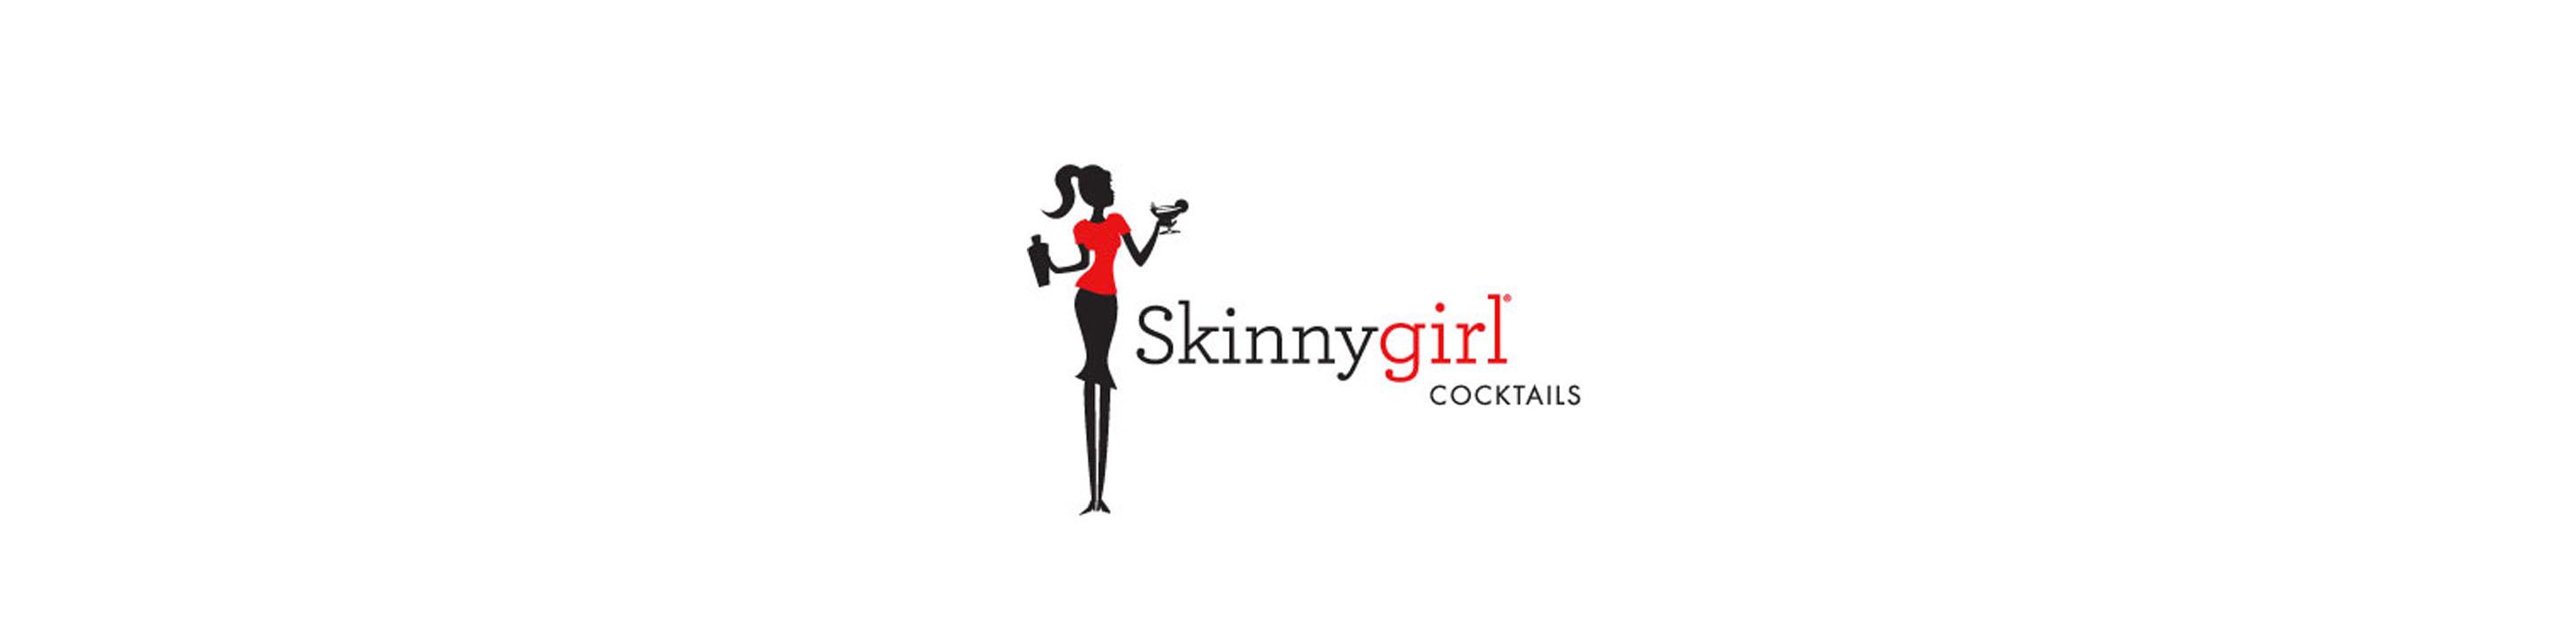 Created in 2009 by natural foods chef, New York Times bestselling author and television star Bethenny Frankel, Skinnygirl Margarita quickly became one of the fastest growing spirits brands in the U.S. 

Buy Skinnygirl online now from nearby liquor stores via Minibar Delivery.